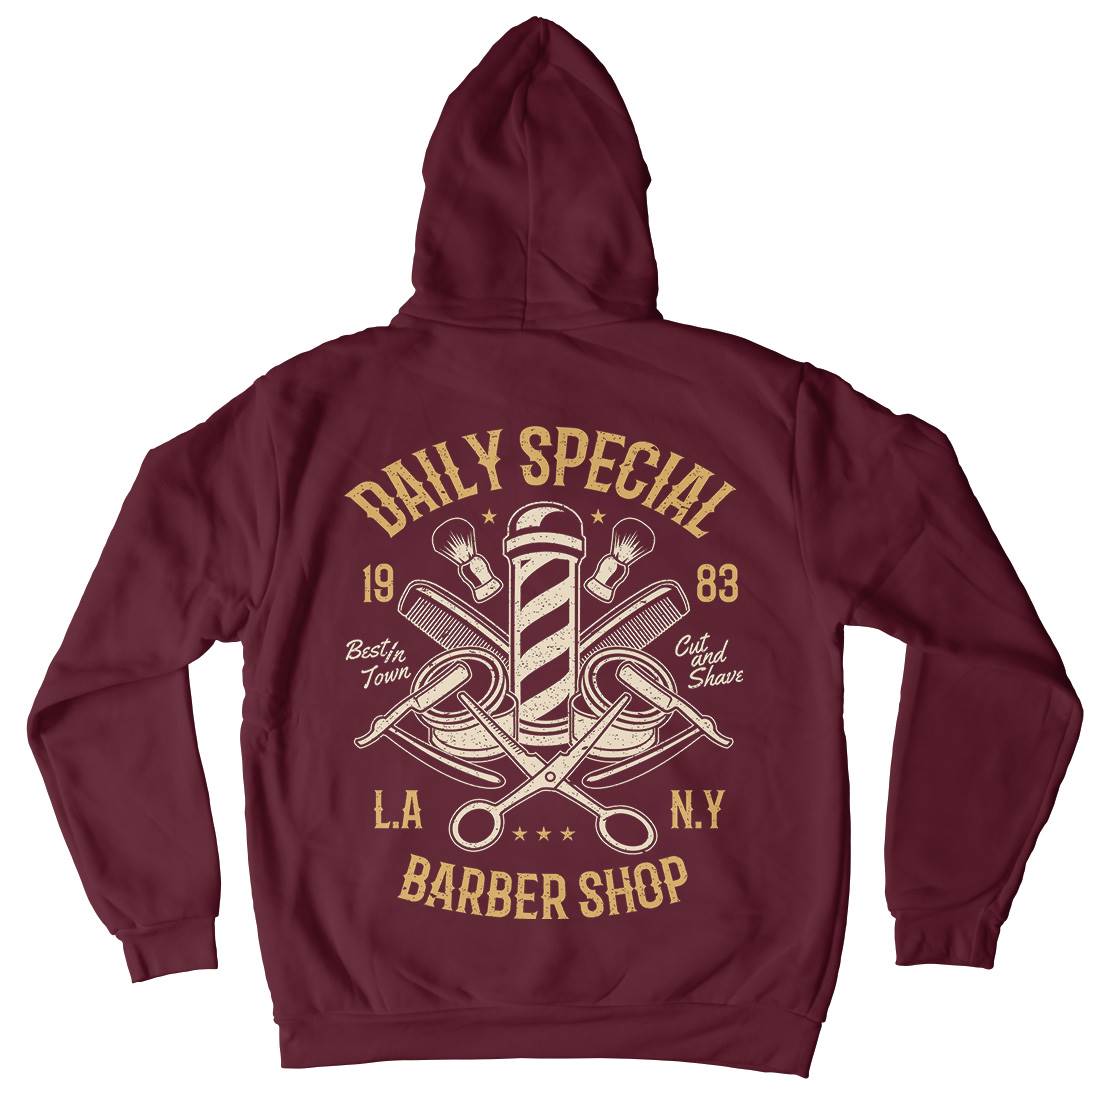 Daily Special Shop Mens Hoodie With Pocket Barber A041